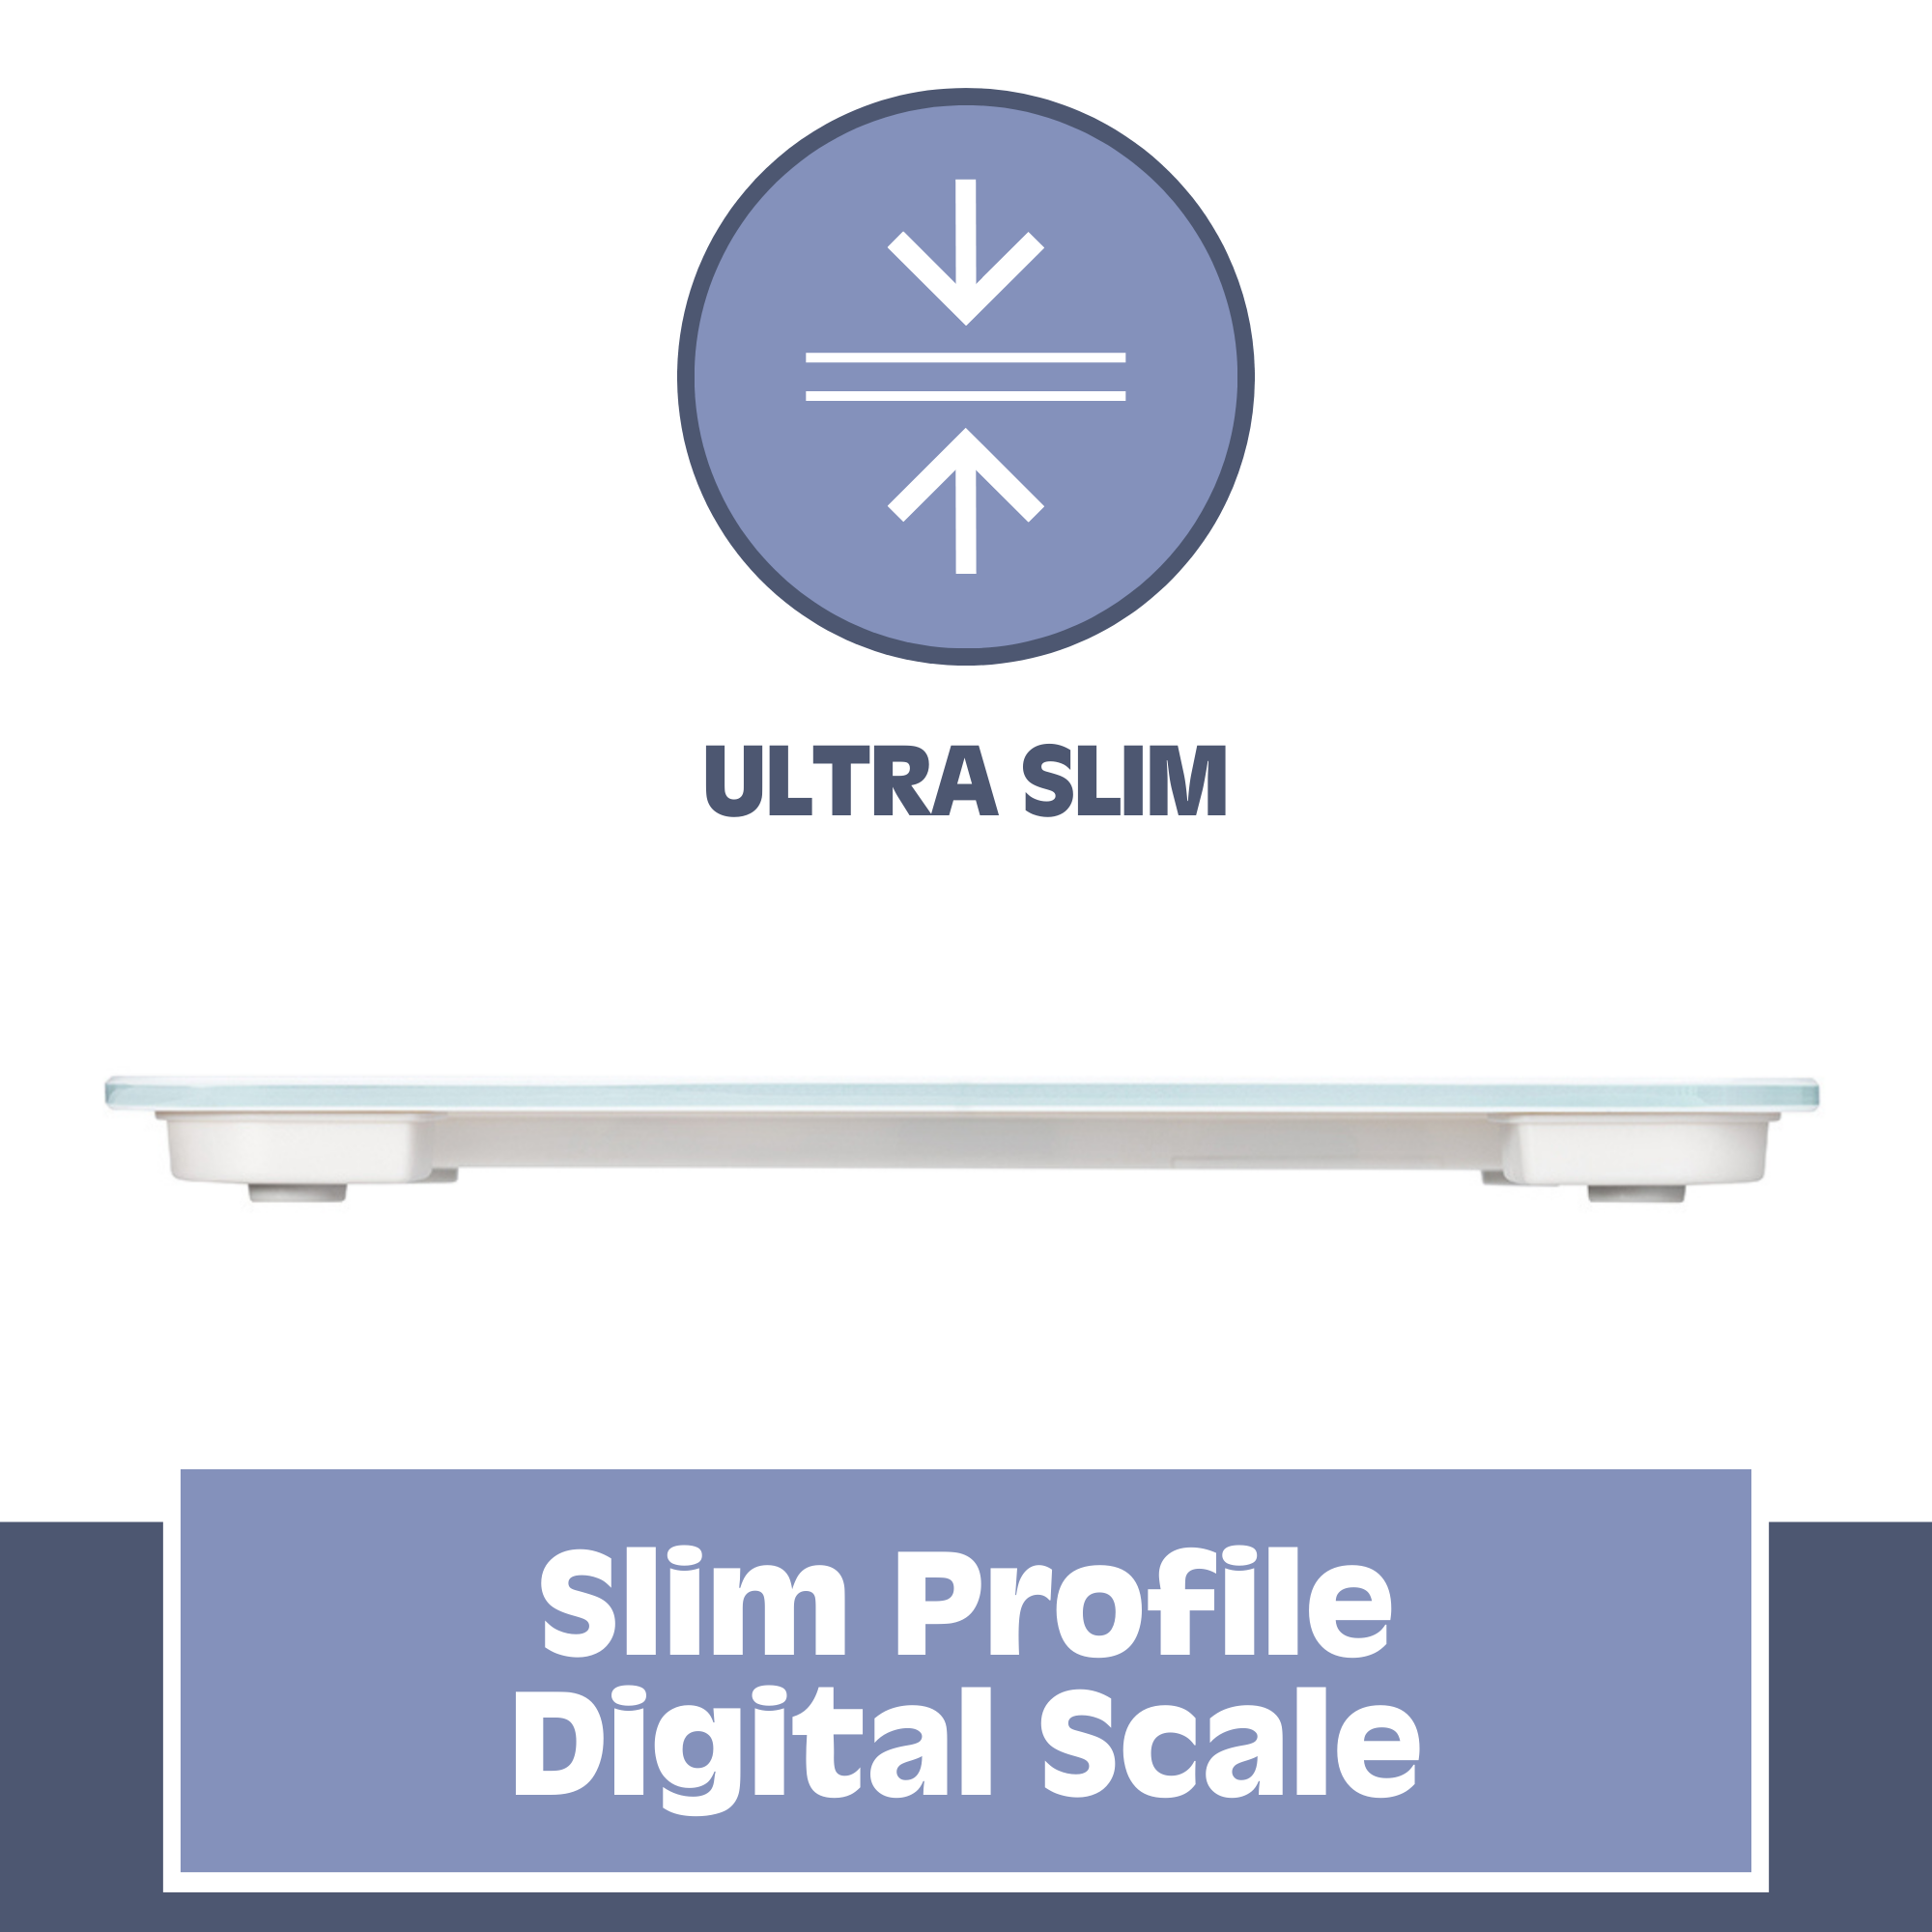 Digital Bathroom Scale for Body Weight, Auto Step-On Design, Ultra Thin, White by Prominence Home